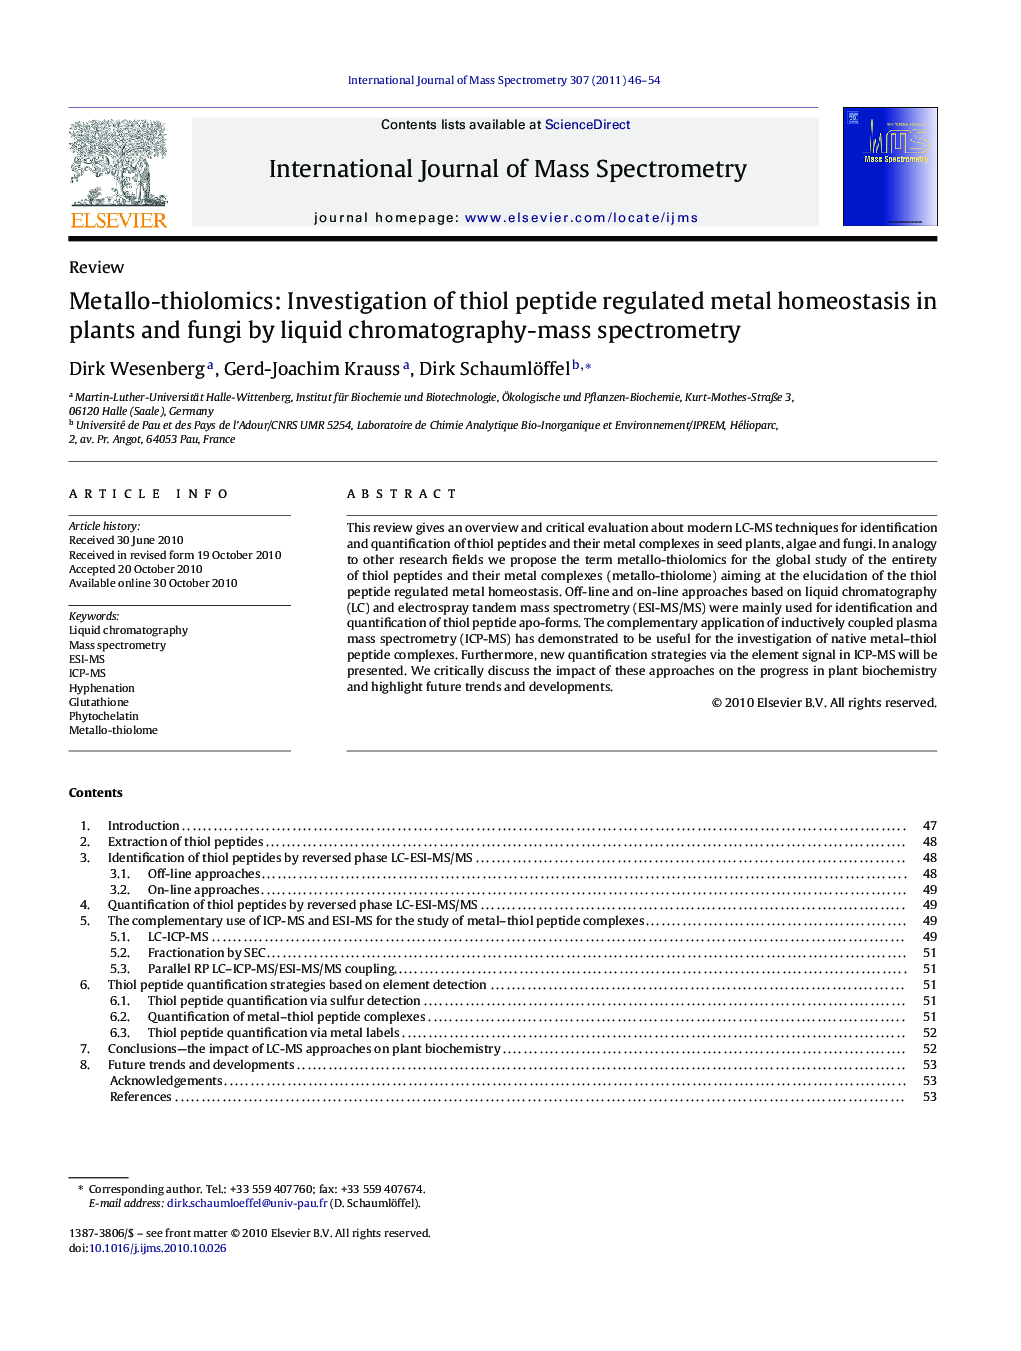 Metallo-thiolomics: Investigation of thiol peptide regulated metal homeostasis in plants and fungi by liquid chromatography-mass spectrometry